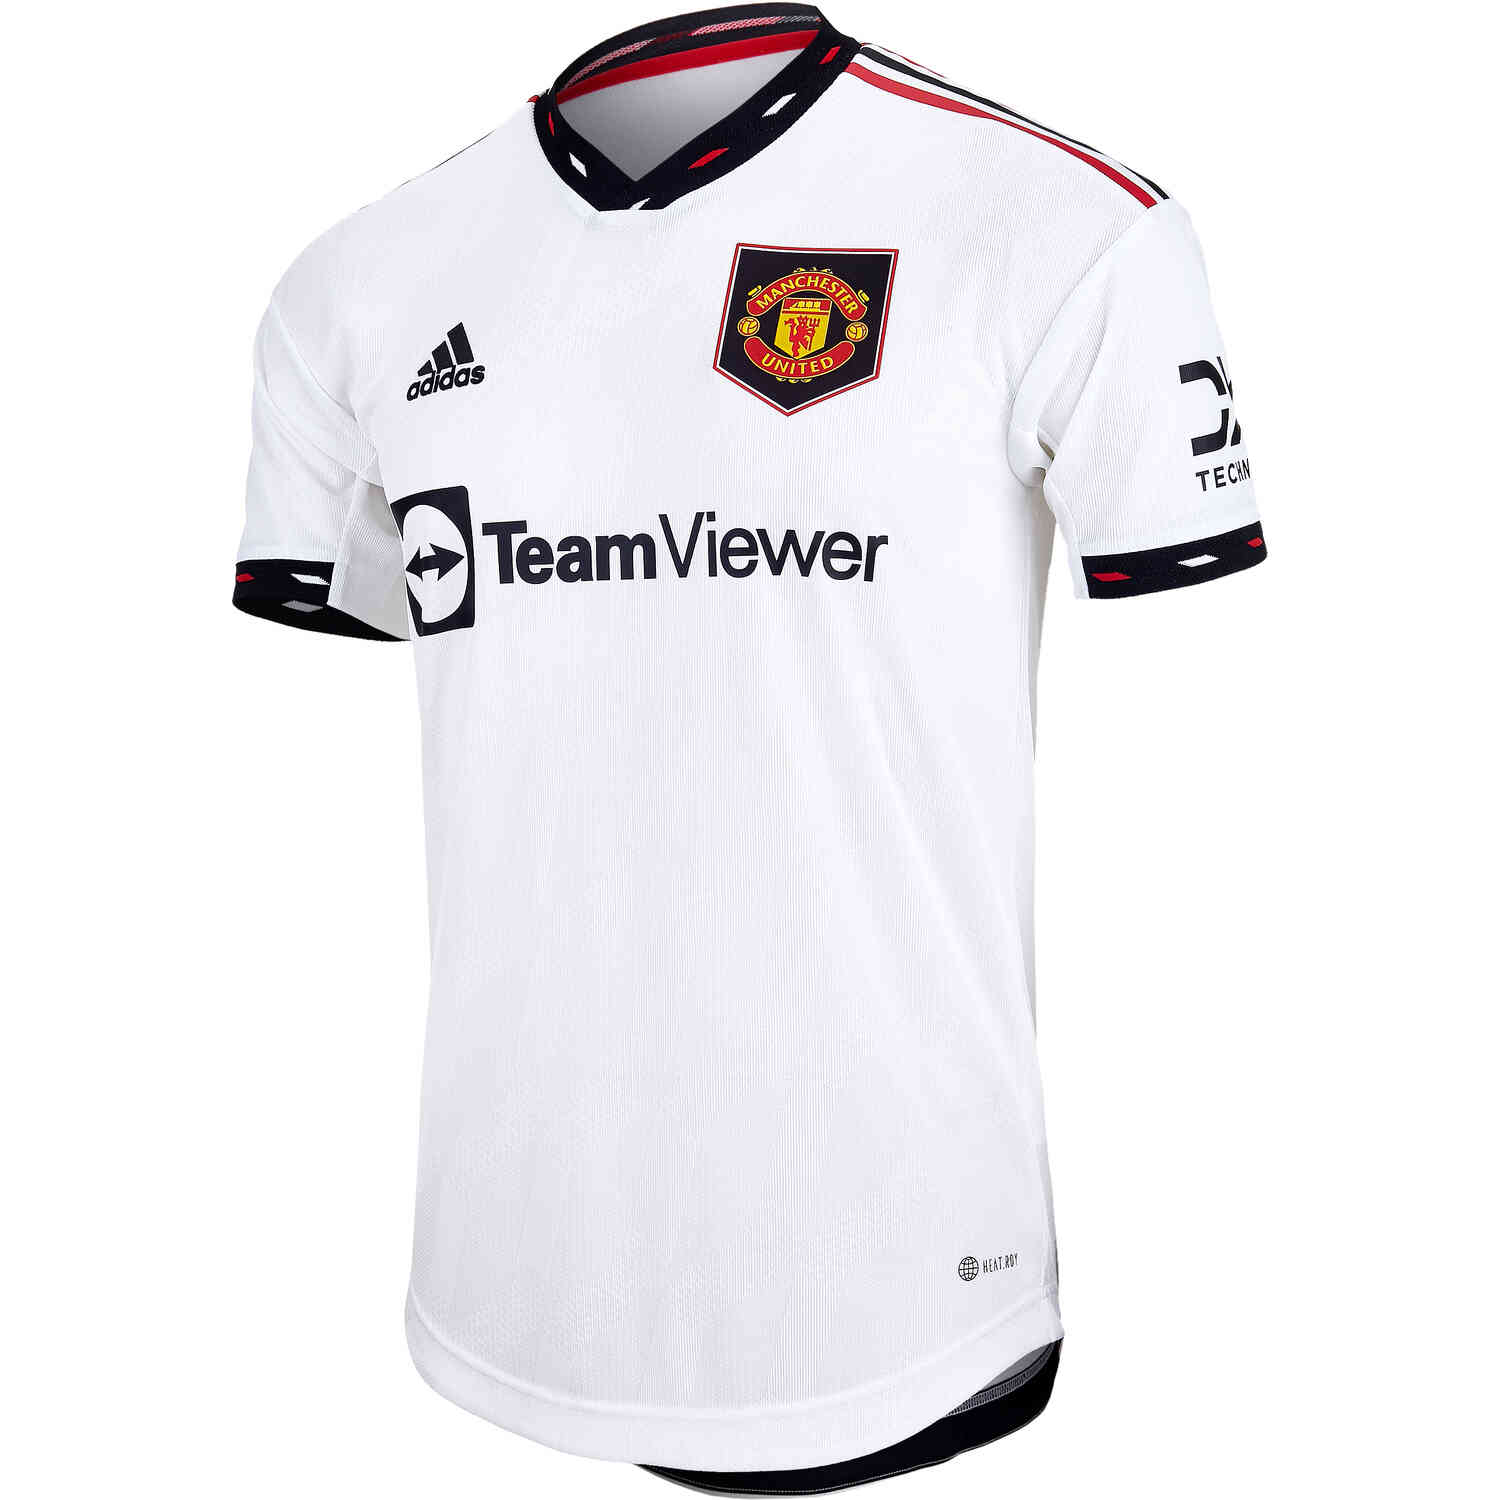 Adidas Manchester United 22/23 Away Jersey XL / White